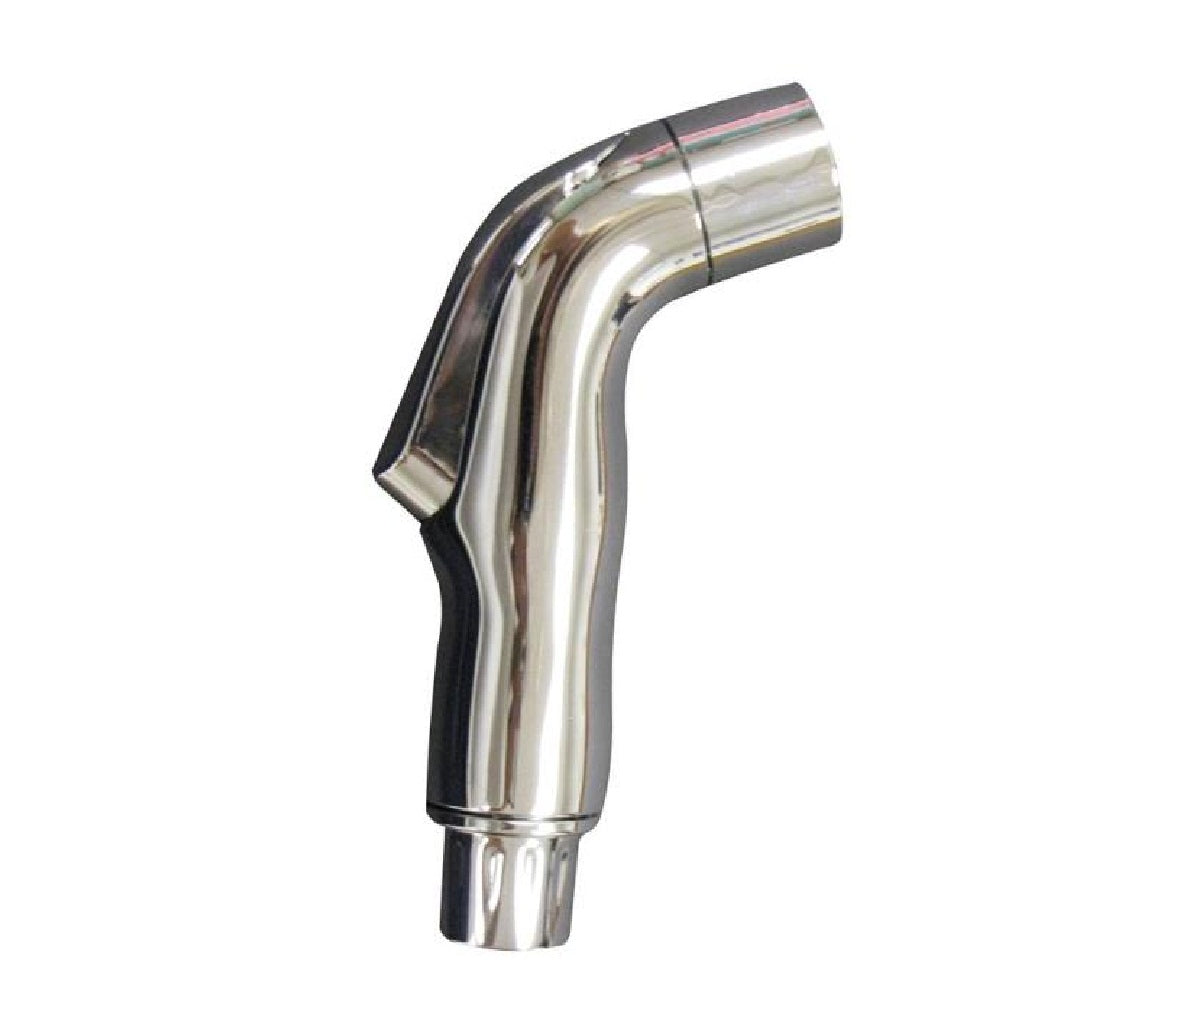 buy faucet & sink repair tools & parts at cheap rate in bulk. wholesale & retail plumbing replacement items store. home décor ideas, maintenance, repair replacement parts